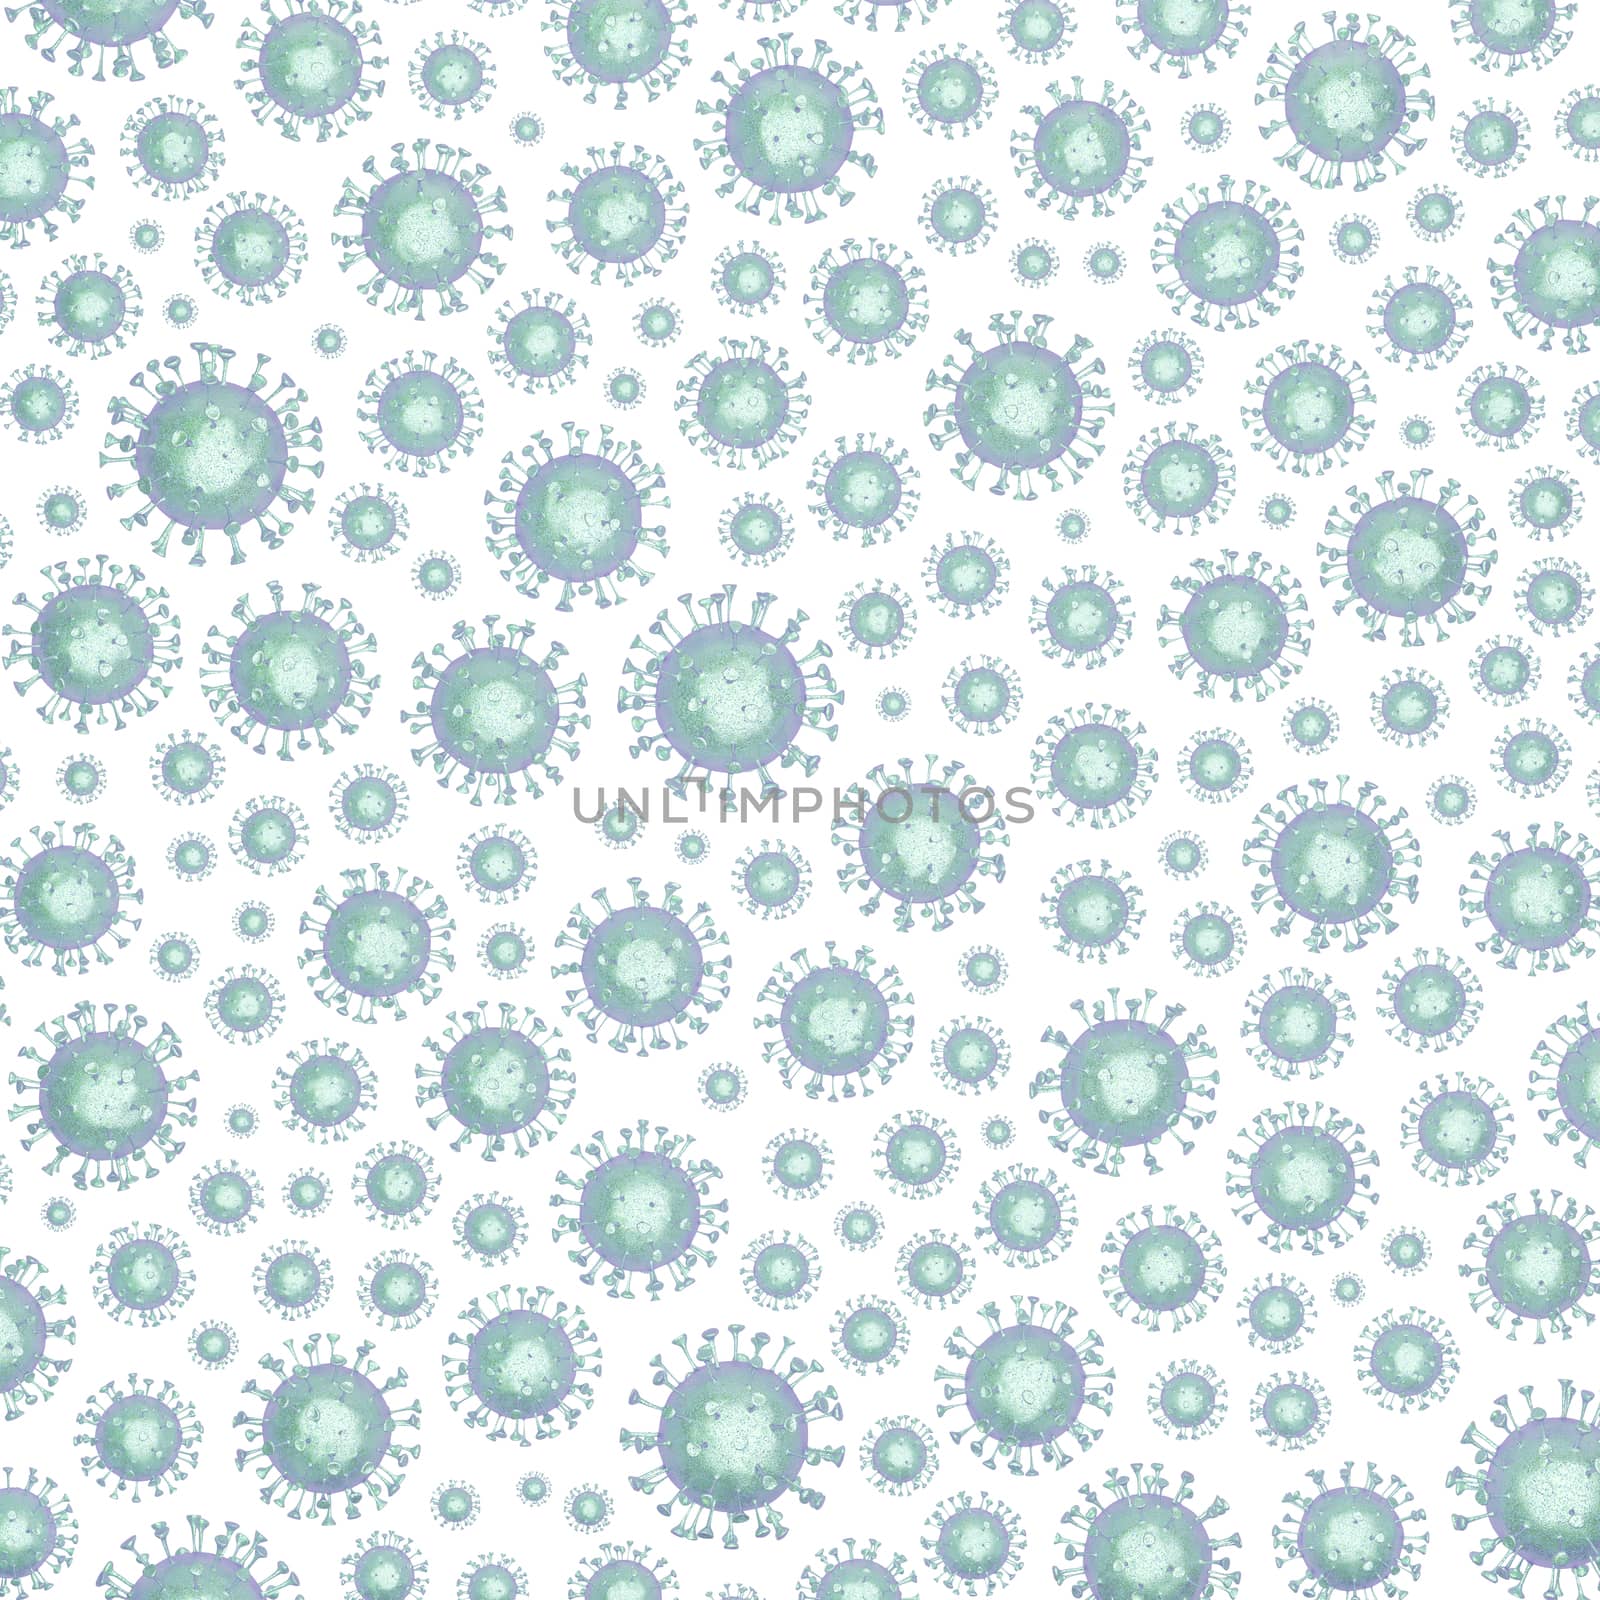 Viruses on white background by magraphics